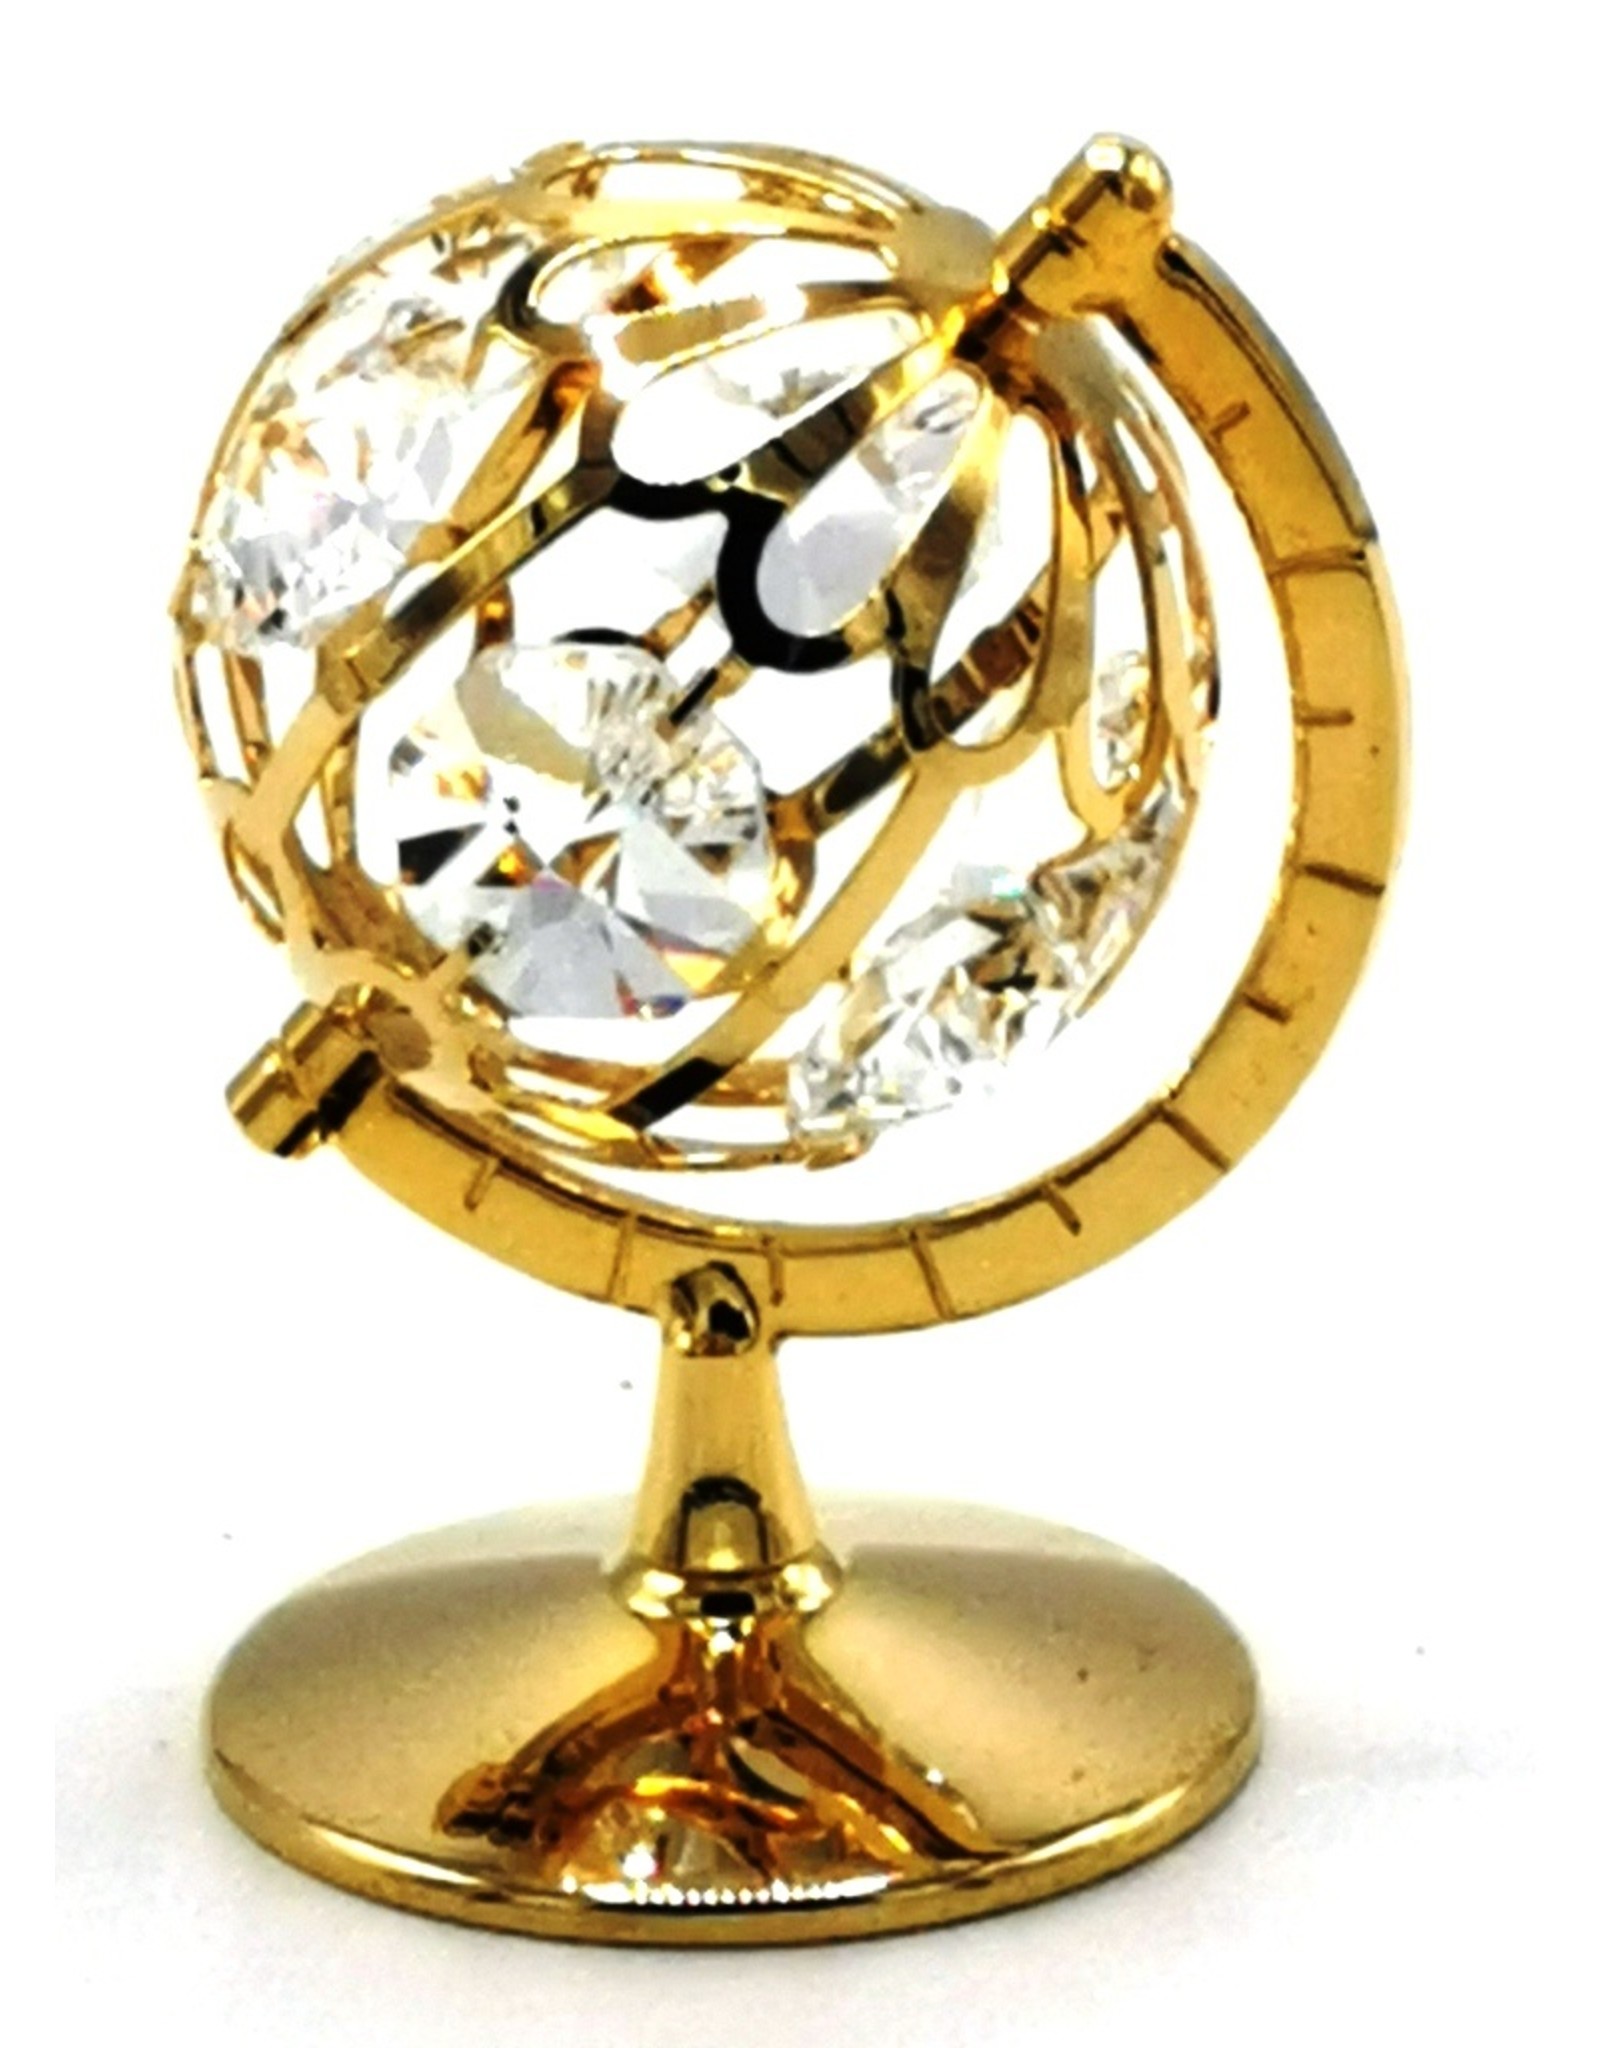 Crystal Temptations Miscellaneous - Miniature globe - gold-plated and with Swarovski